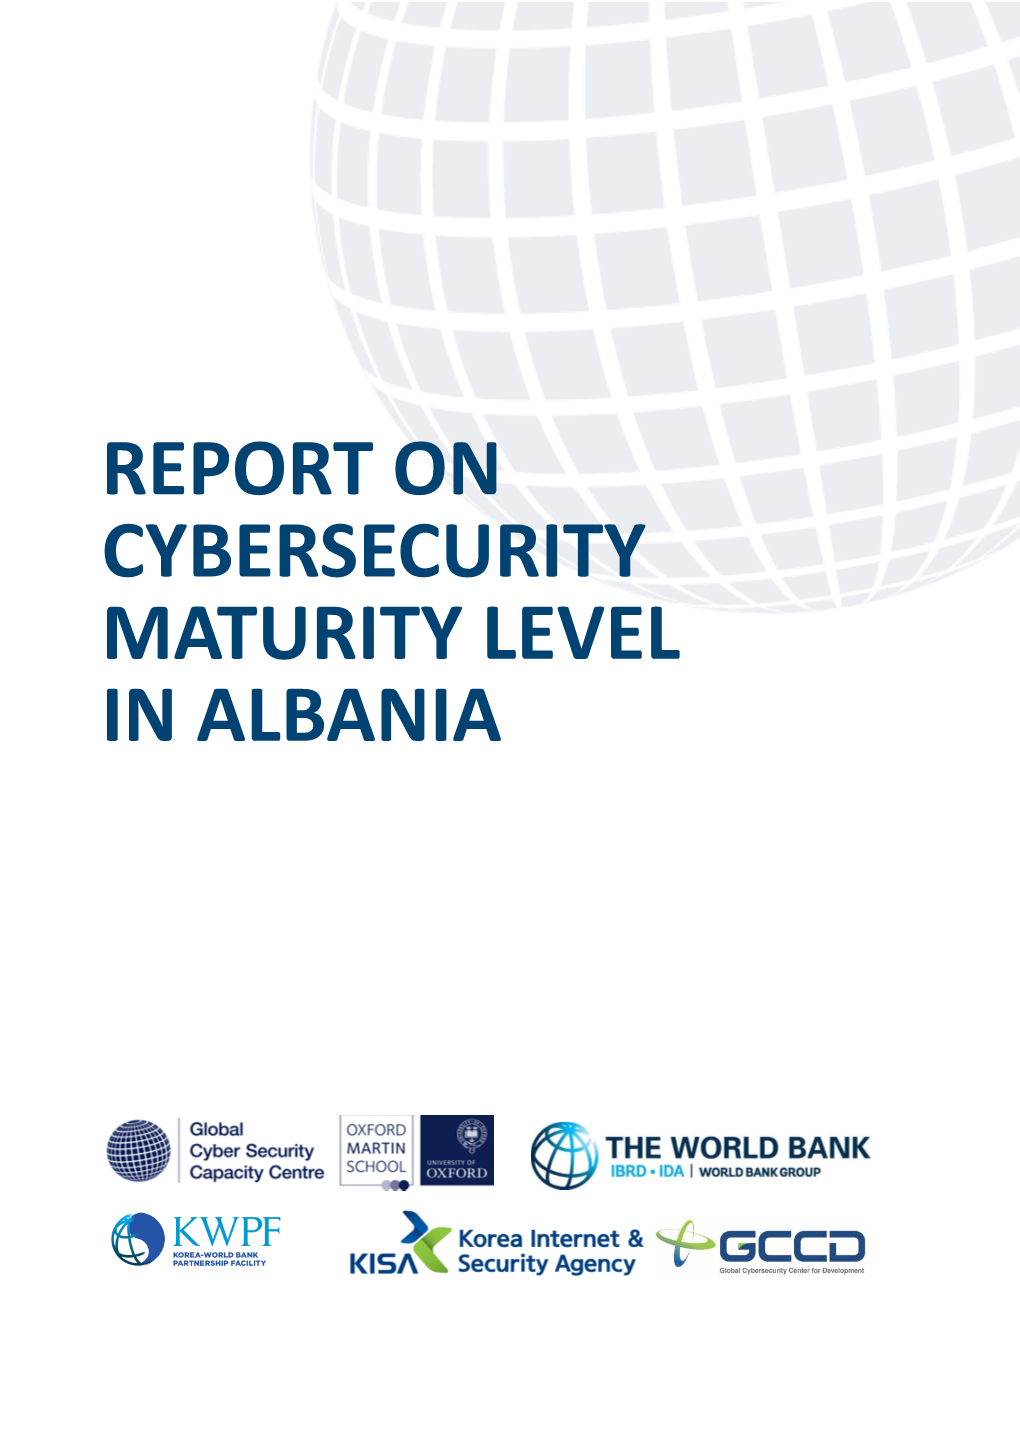 Report on Cybersecurity Maturity Level in Albania